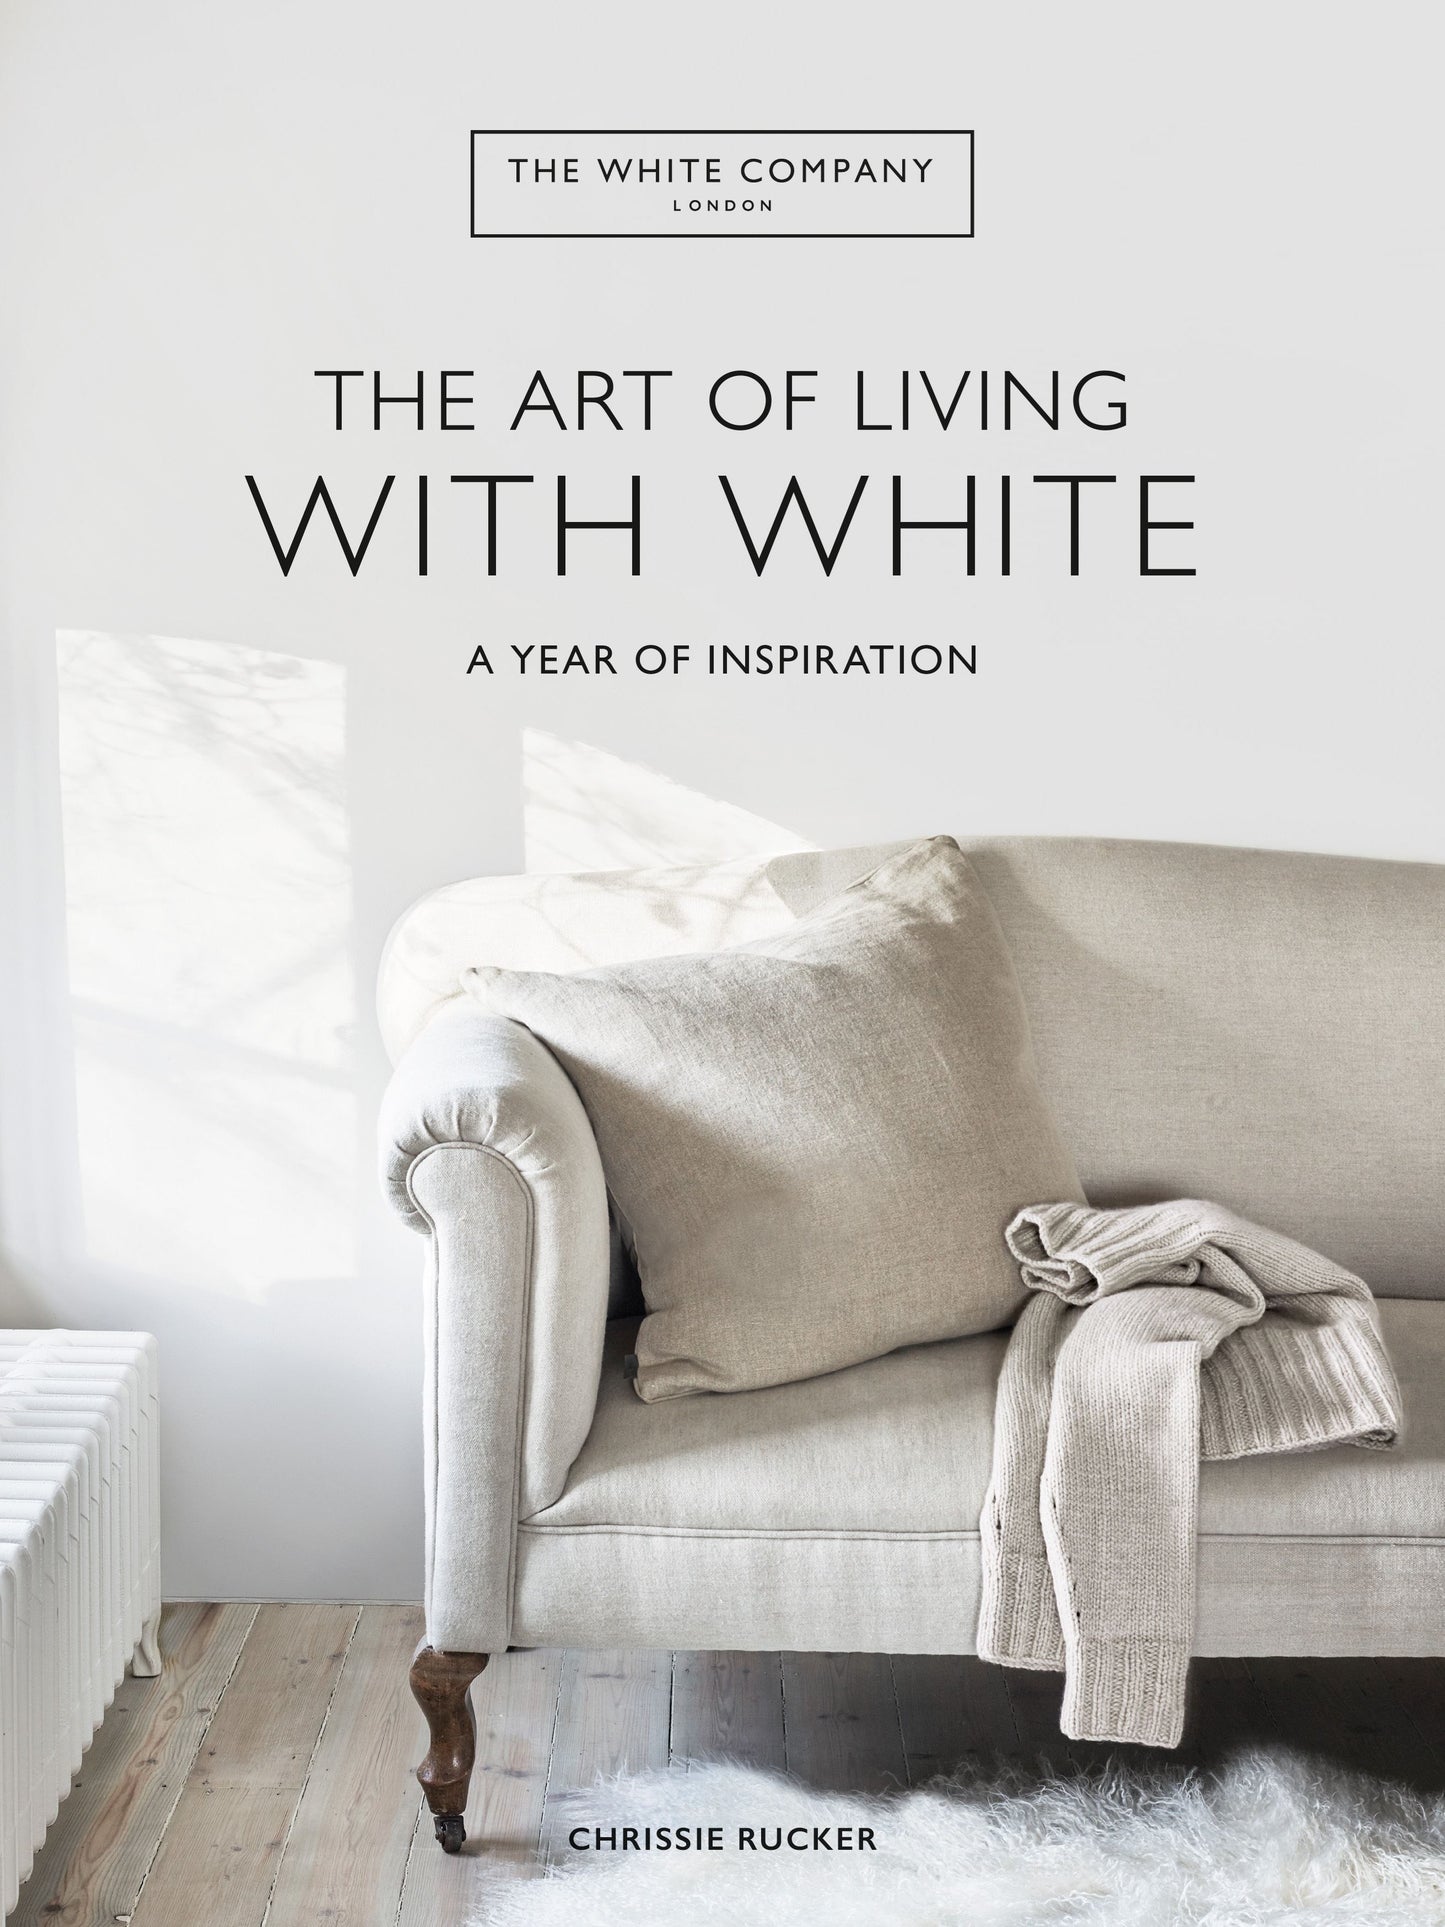 The Art Of Living With White - The White Company